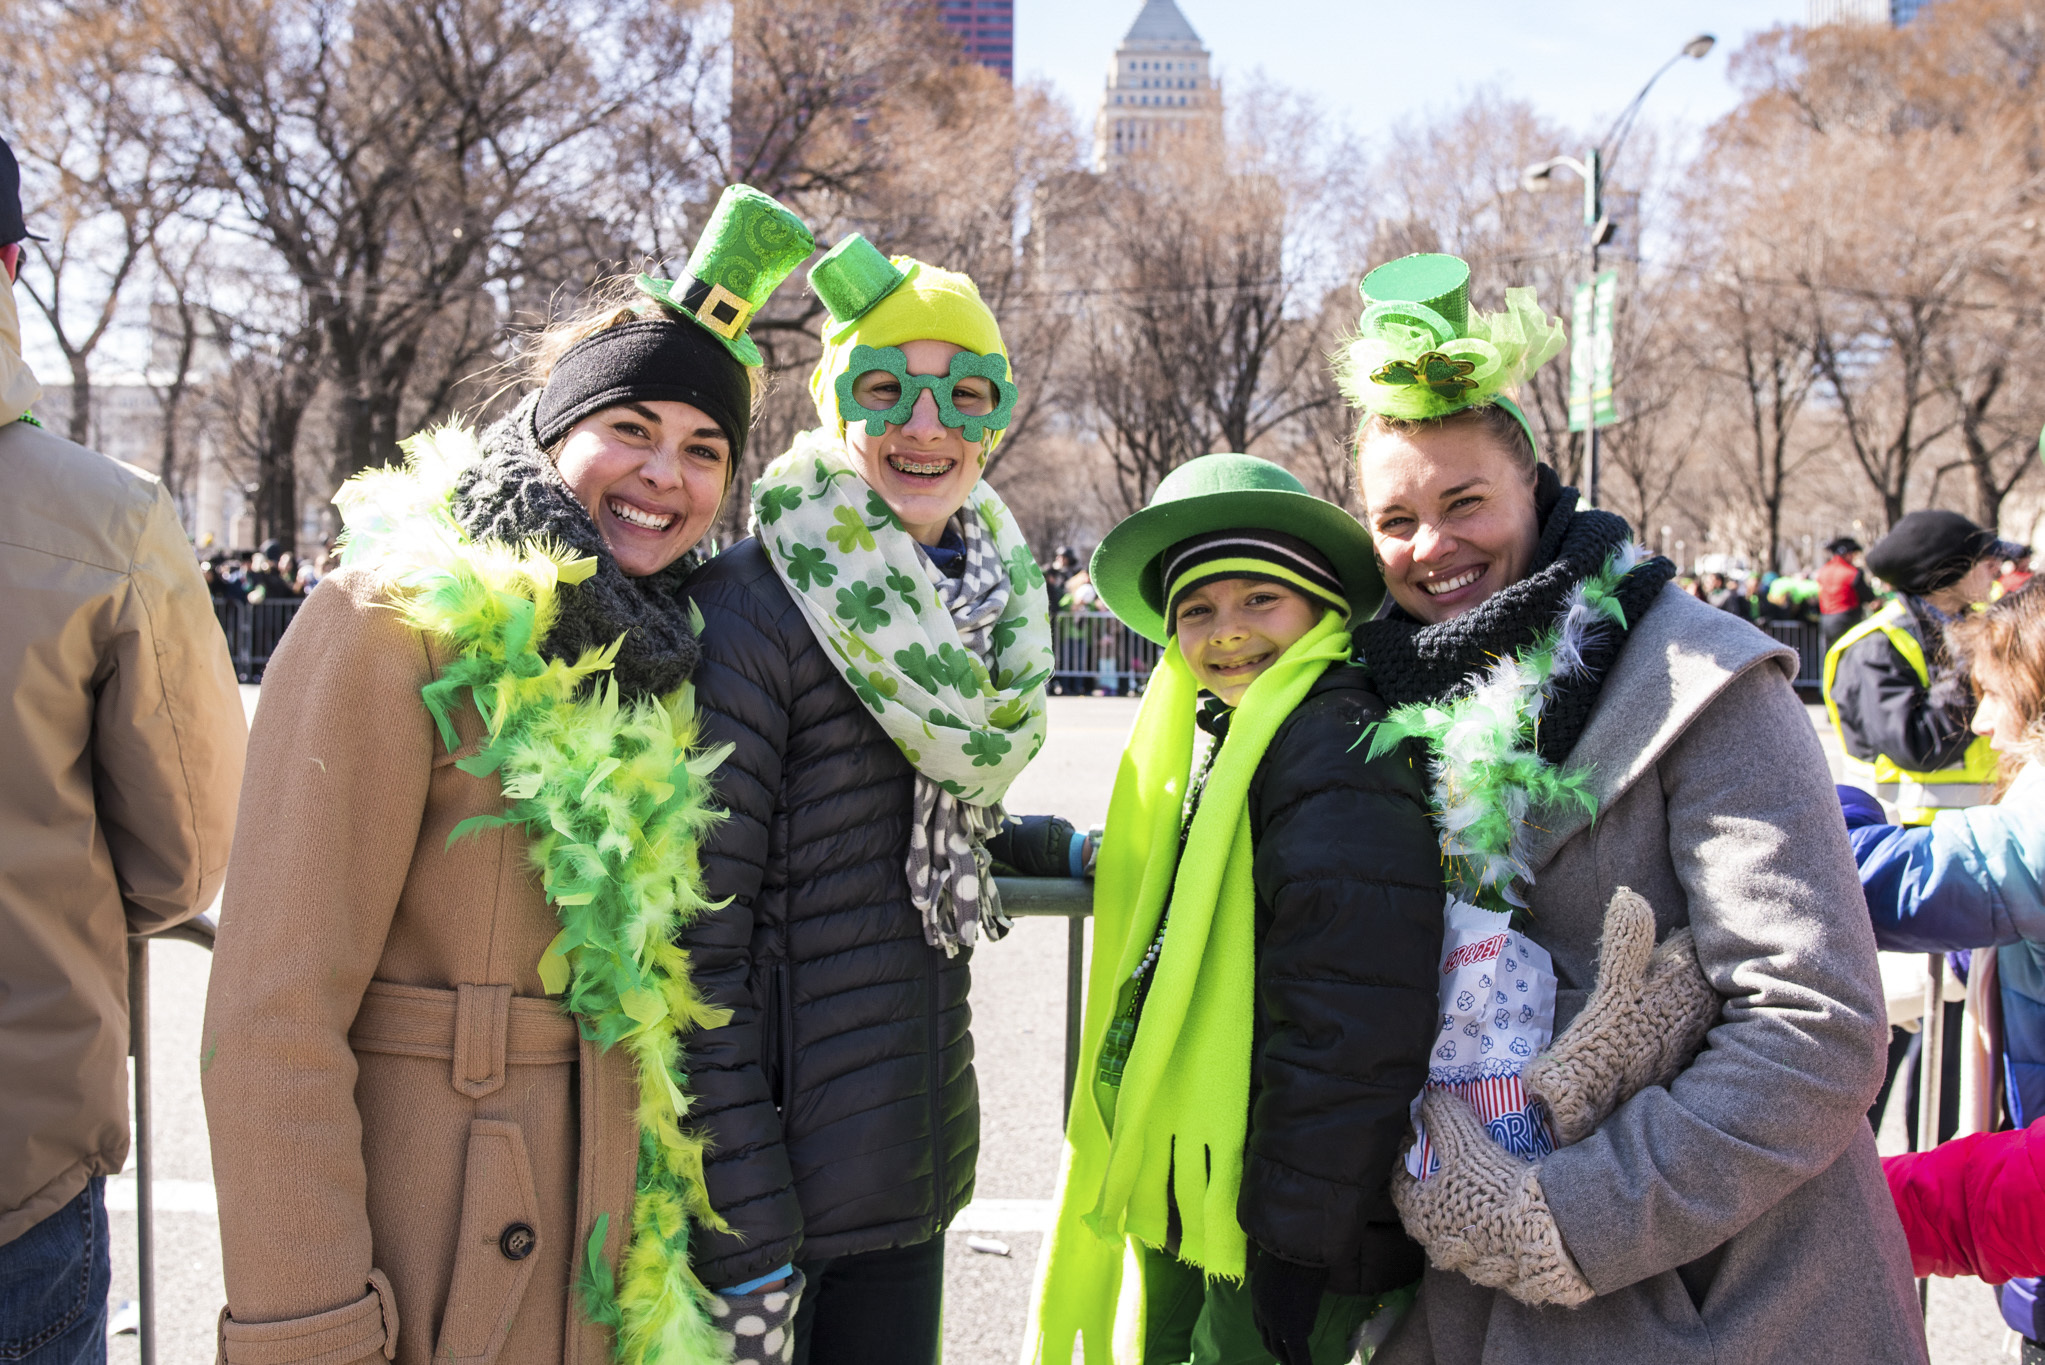 Photos from the Chicago St. Patrick's Day Parade and river dyeing